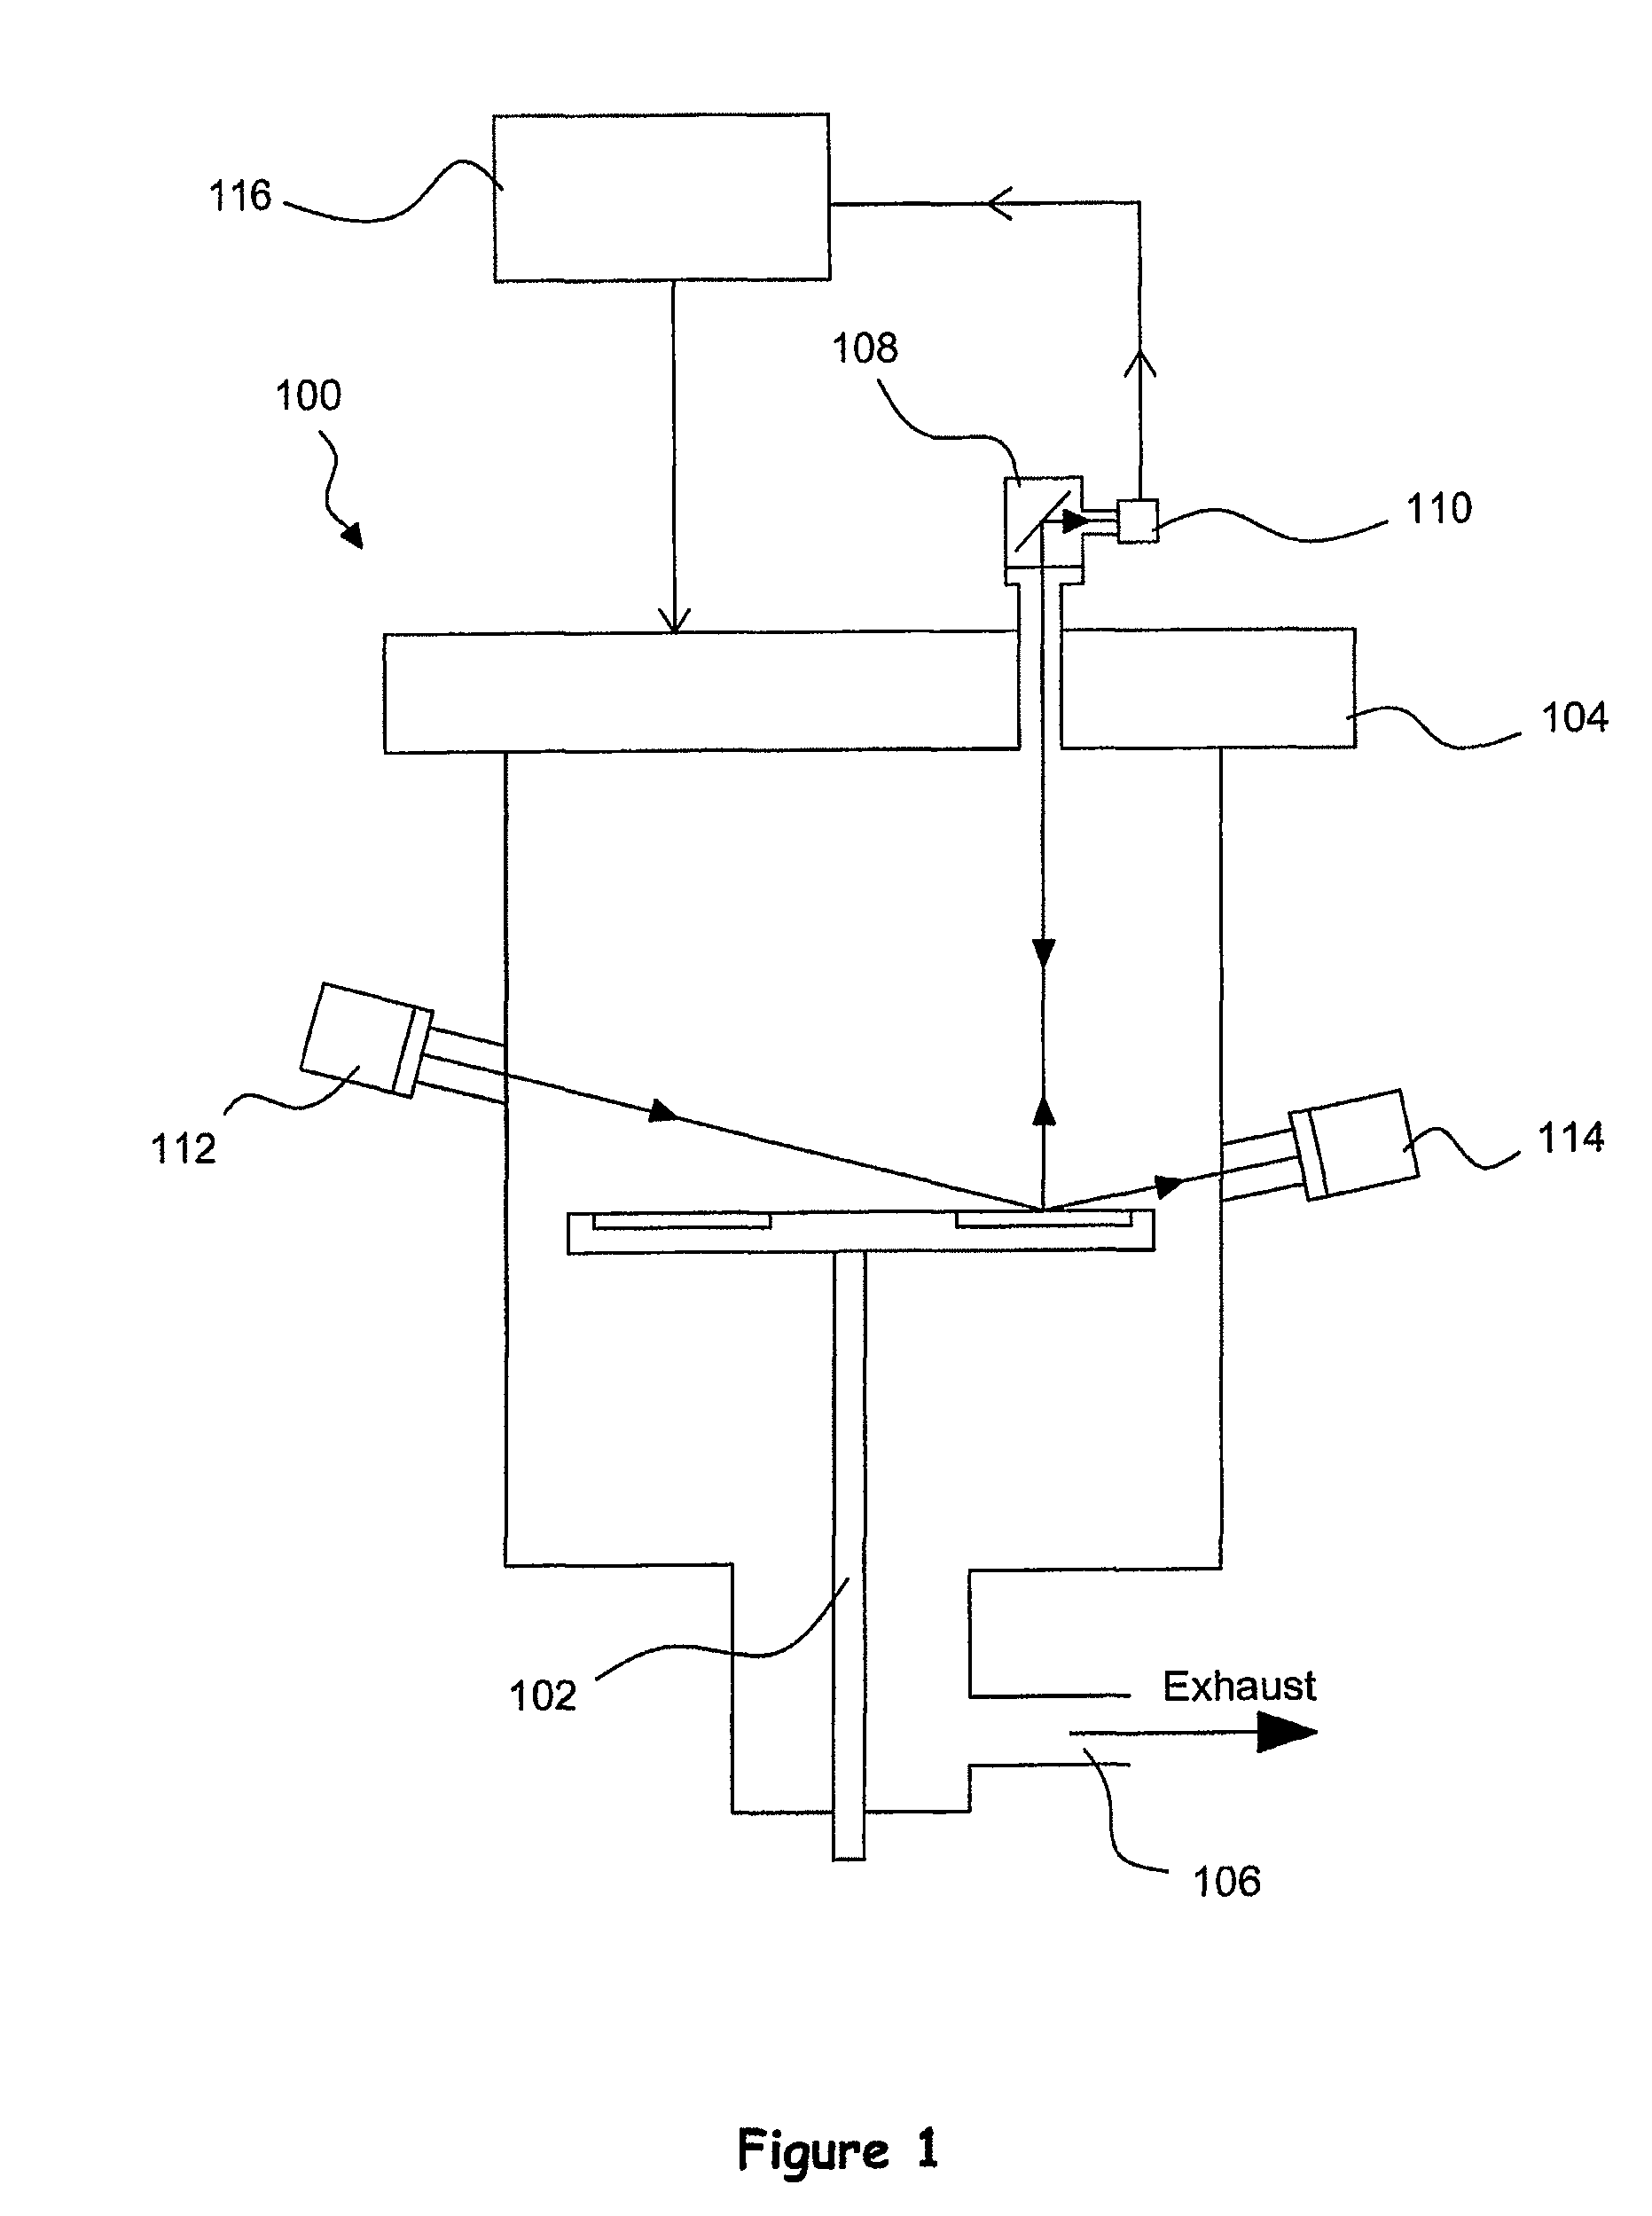 Method of fabricating semiconductor devices with a multi-role facilitation layer